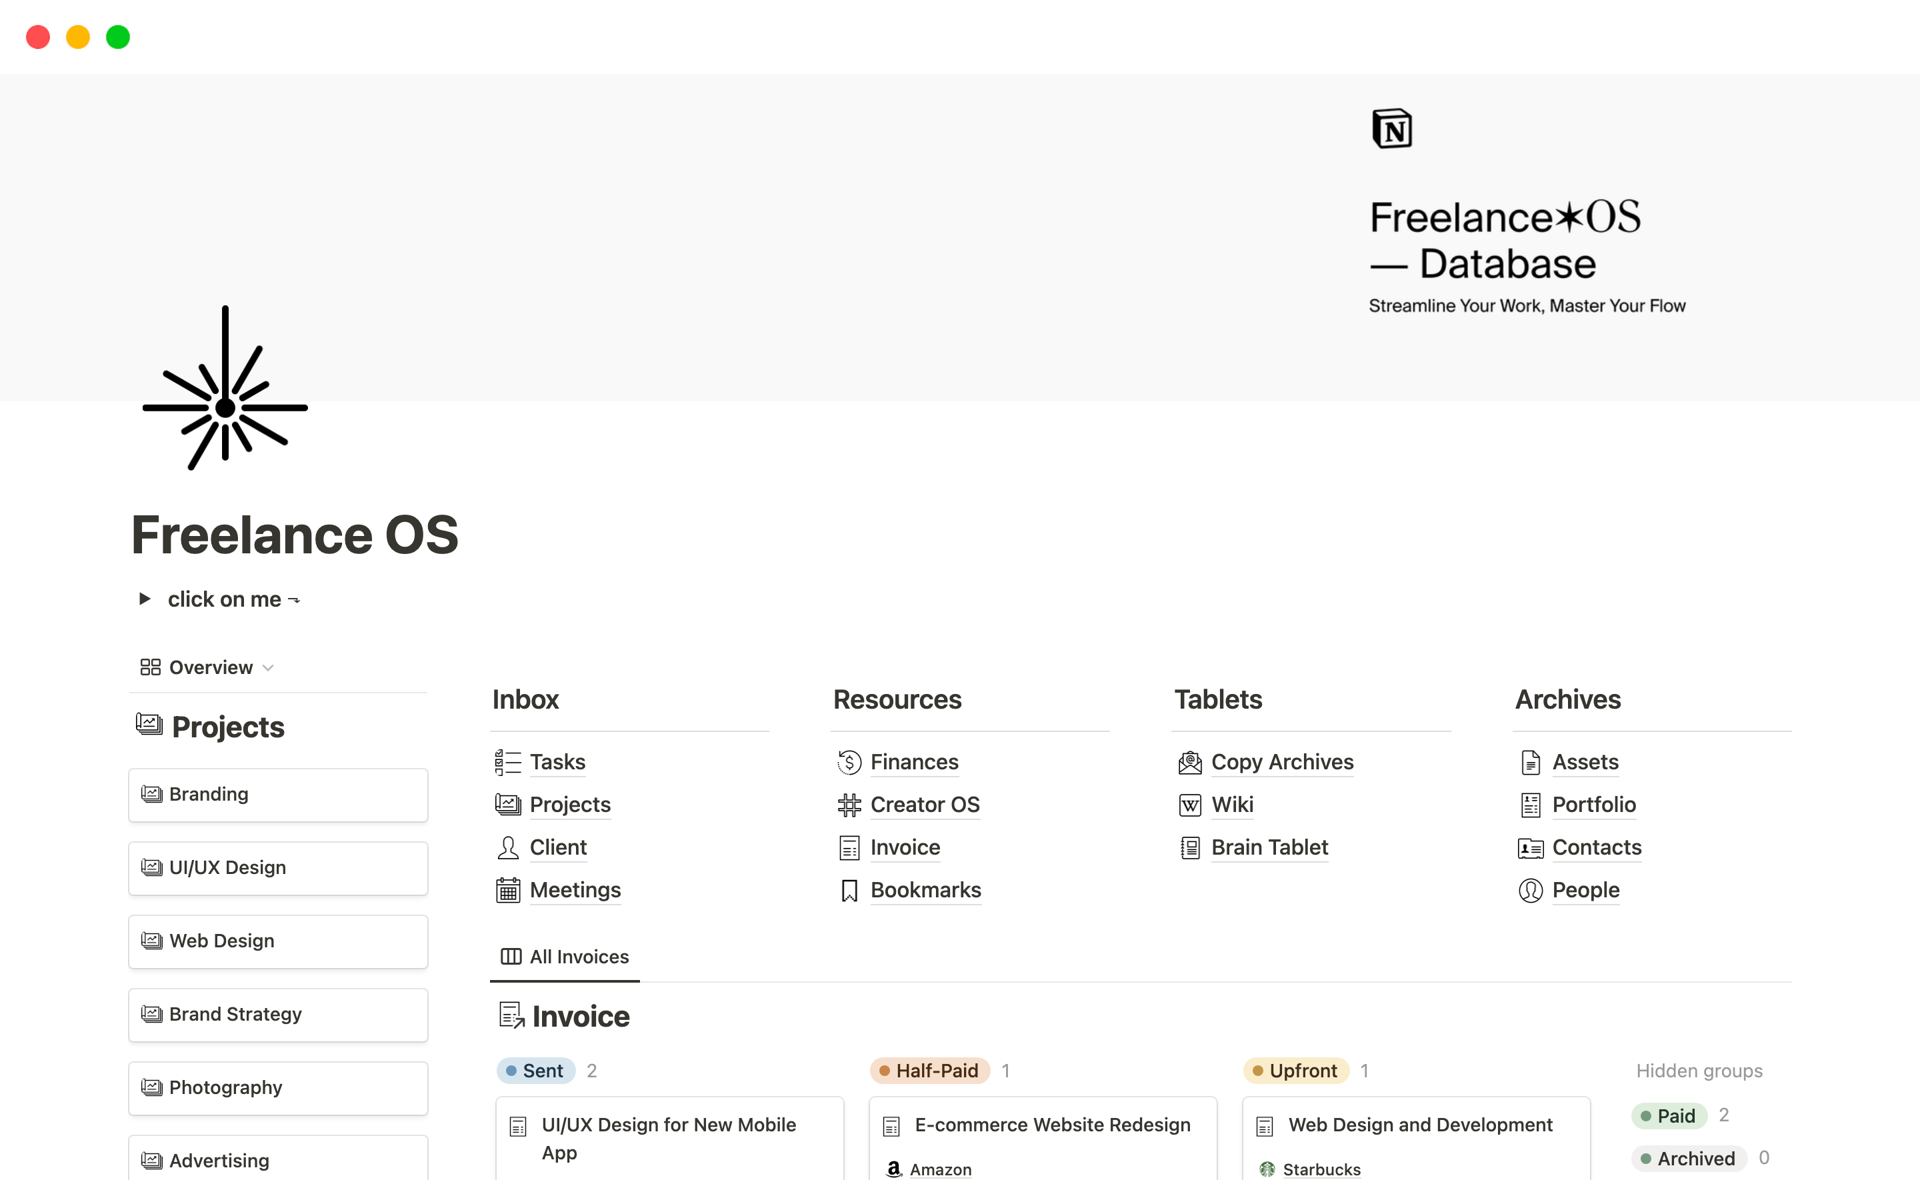 Freelance OS is your go-to tool for freelancers and agencies. It simplifies project management, task tracking, and organization